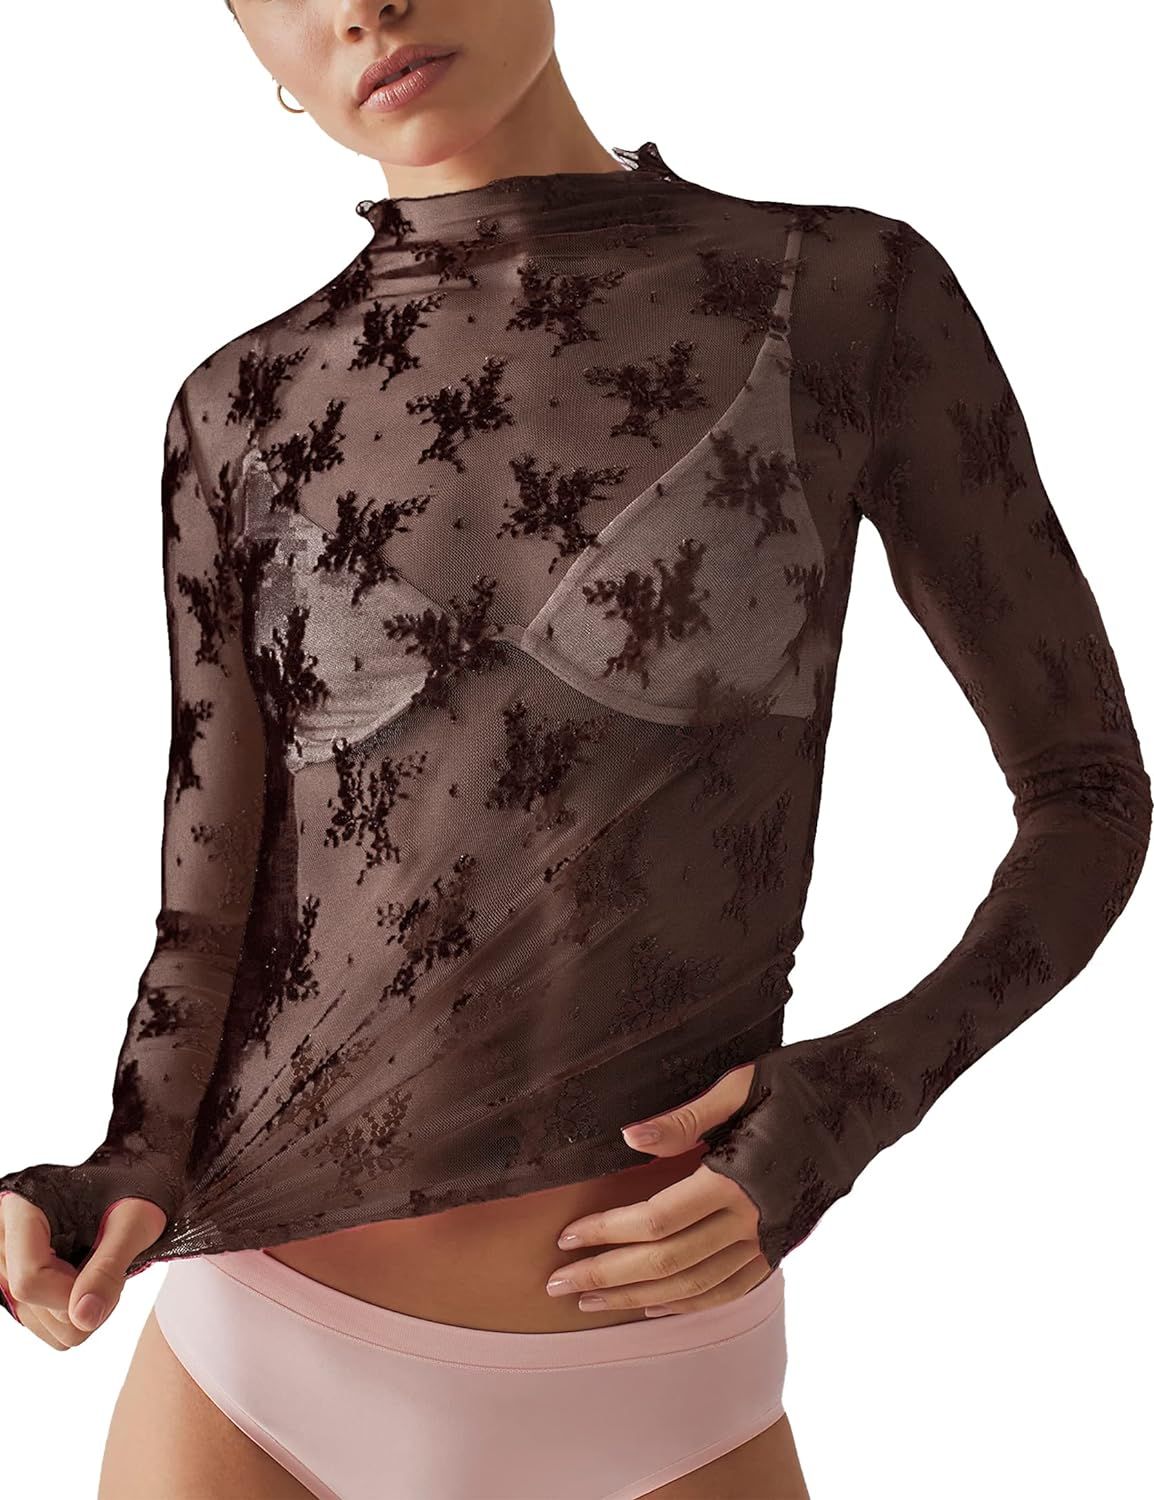 Ugerlov Women's Long Sleeve Mesh Top Mock Neck Sheer Blouse See Through Floral Lace Tops | Amazon (US)